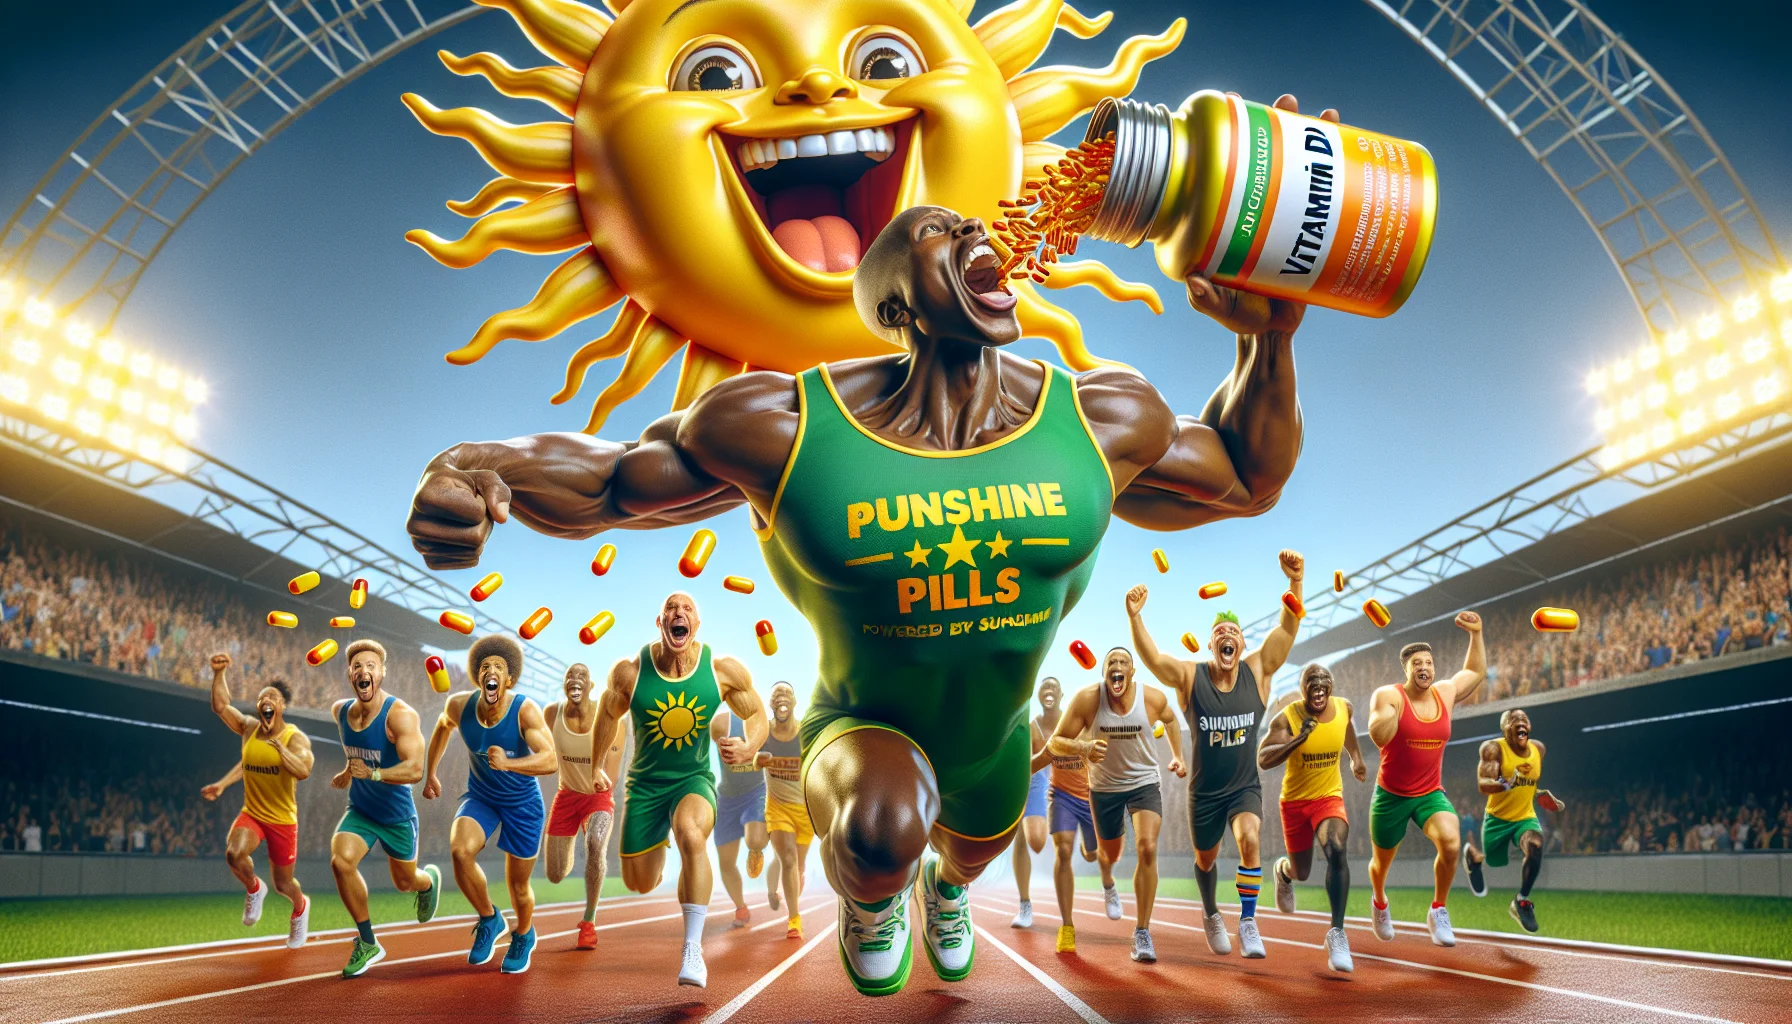 Generate a playful and amusing scene promoting the use of vitamin D supplements for sports. Imagine a hyper-realistic setting where a sun-character, with a cheesy grin on its face, is pouring rays represented as glowing capsules of vitamin D into the open mouth of a muscular Afro-Caribbean sportsman in full sports gear, all pumped up and sprinting. On the sportsman's t-shirt, write 'Powered by Sunshine Pills'. Everyone in the audience, consisting of various enthusiastic sports figures of different descents and genders, are cheering wildly, banners in hand with the slogan 'Vitamin D for Victory!' etched on them.